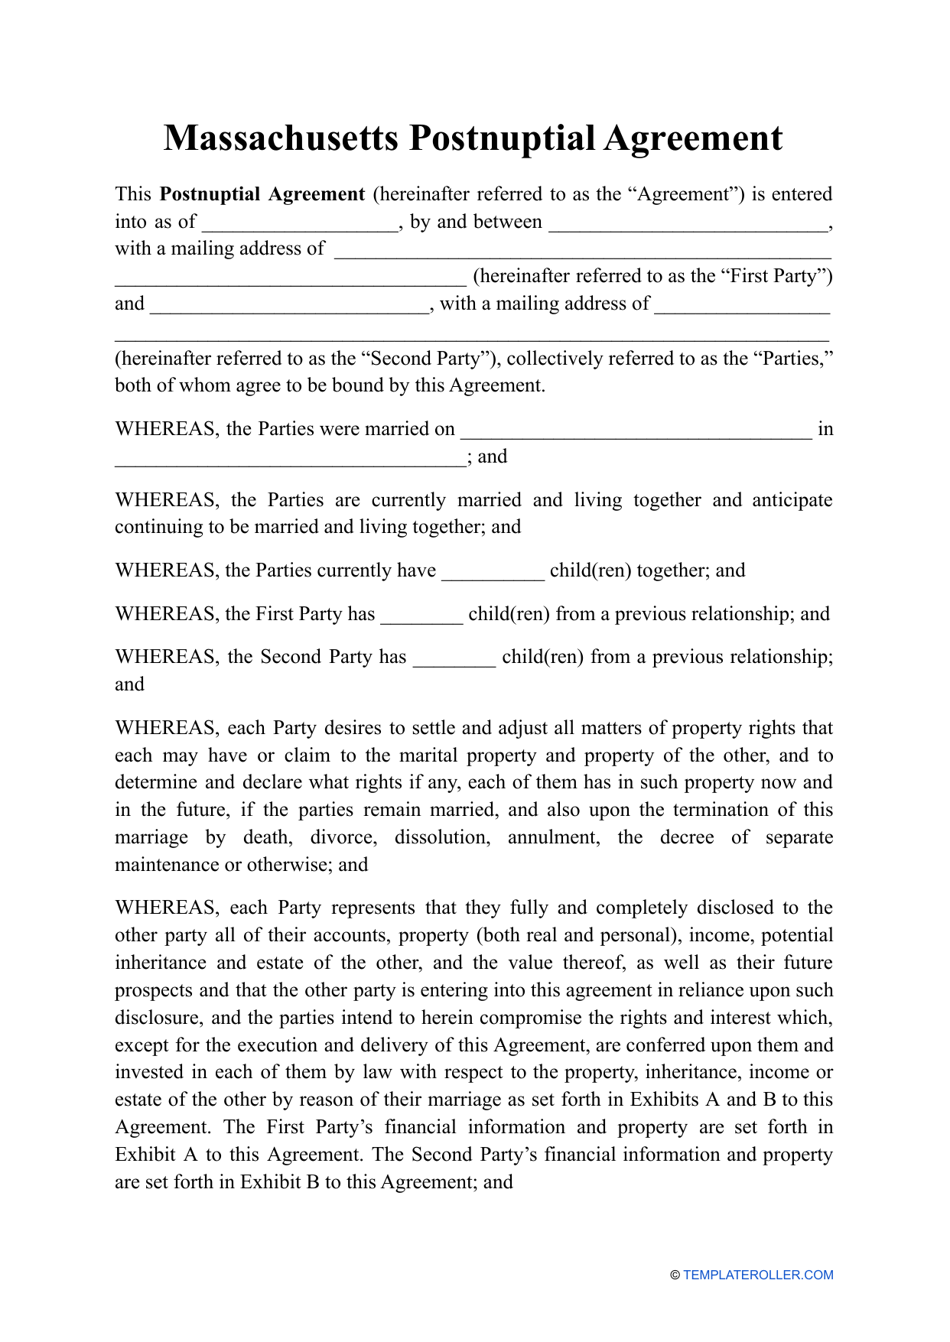 Postnuptial Agreement Template - Massachusetts, Page 1